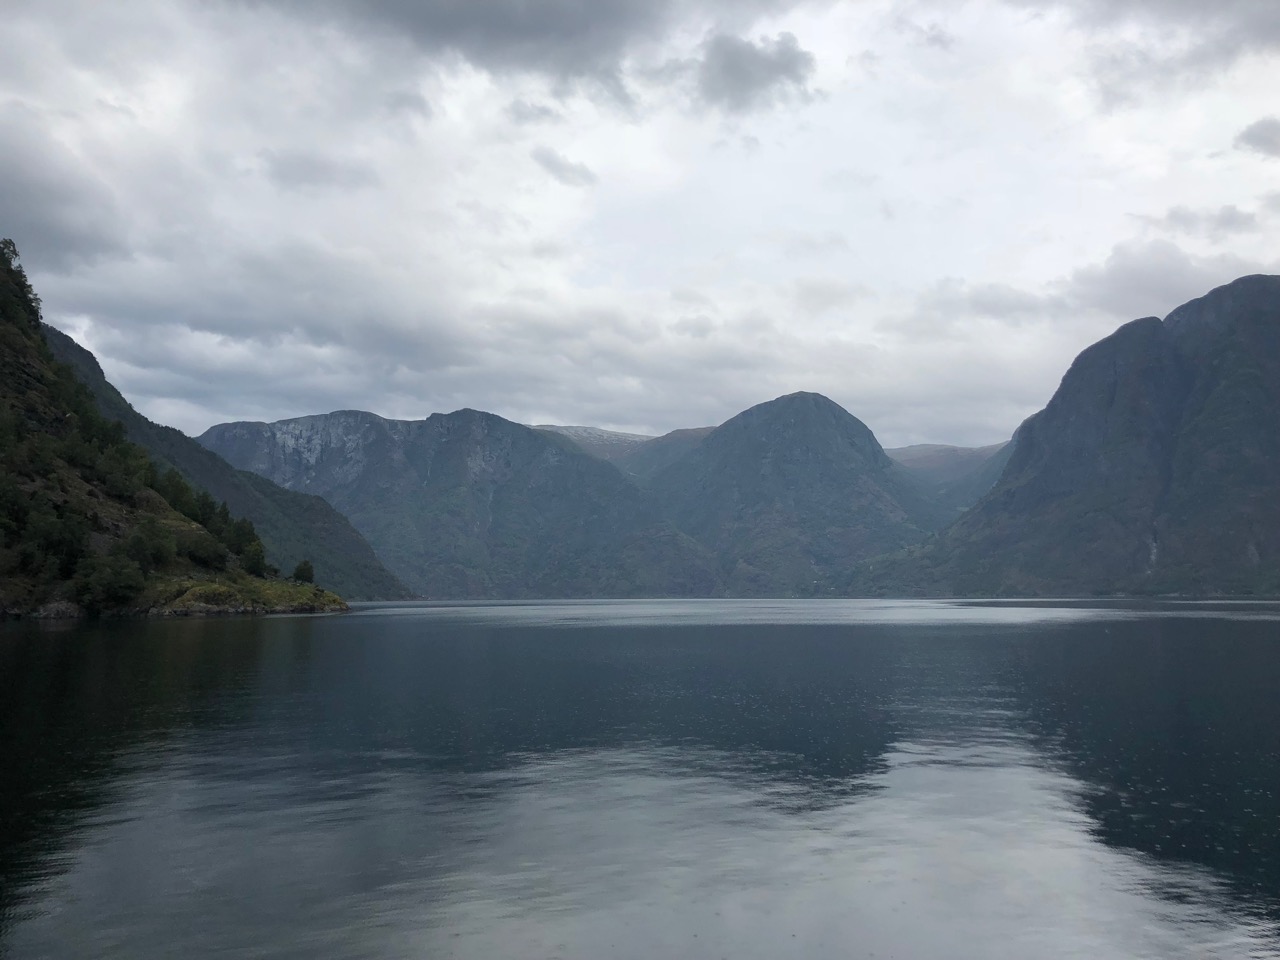 From Flan along the Fjord by Ferry